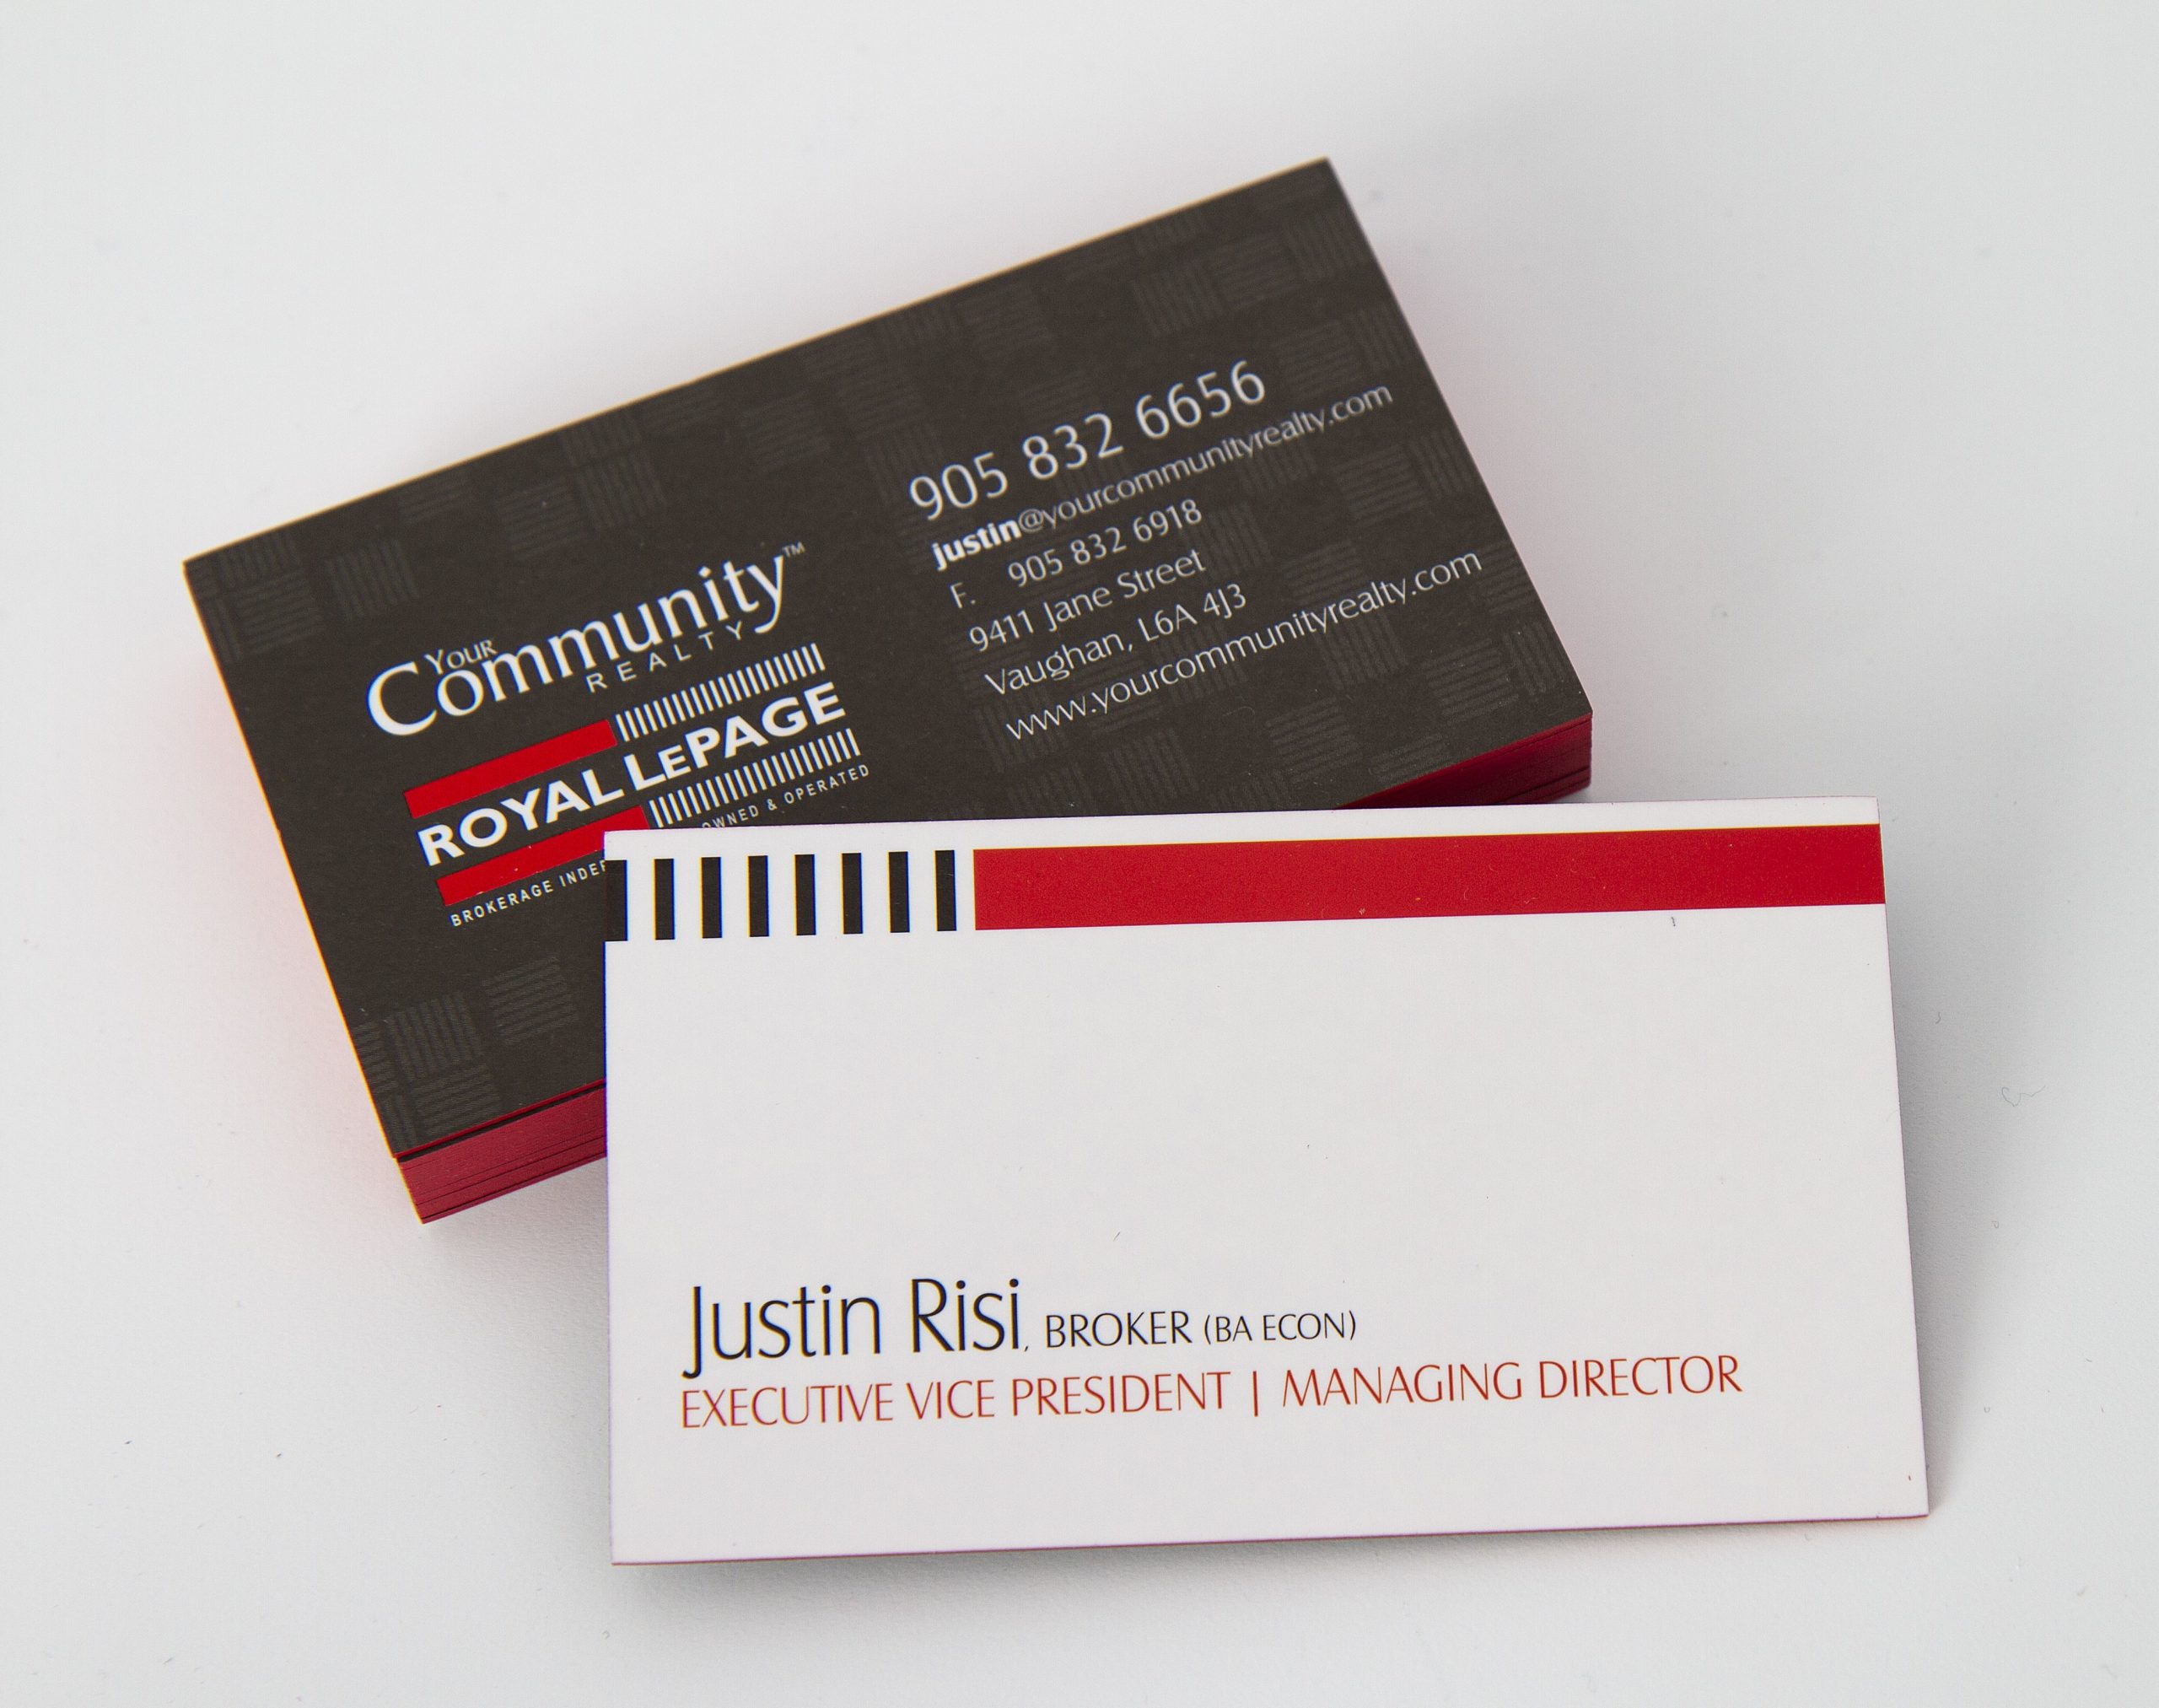 royal lepage business cards 1